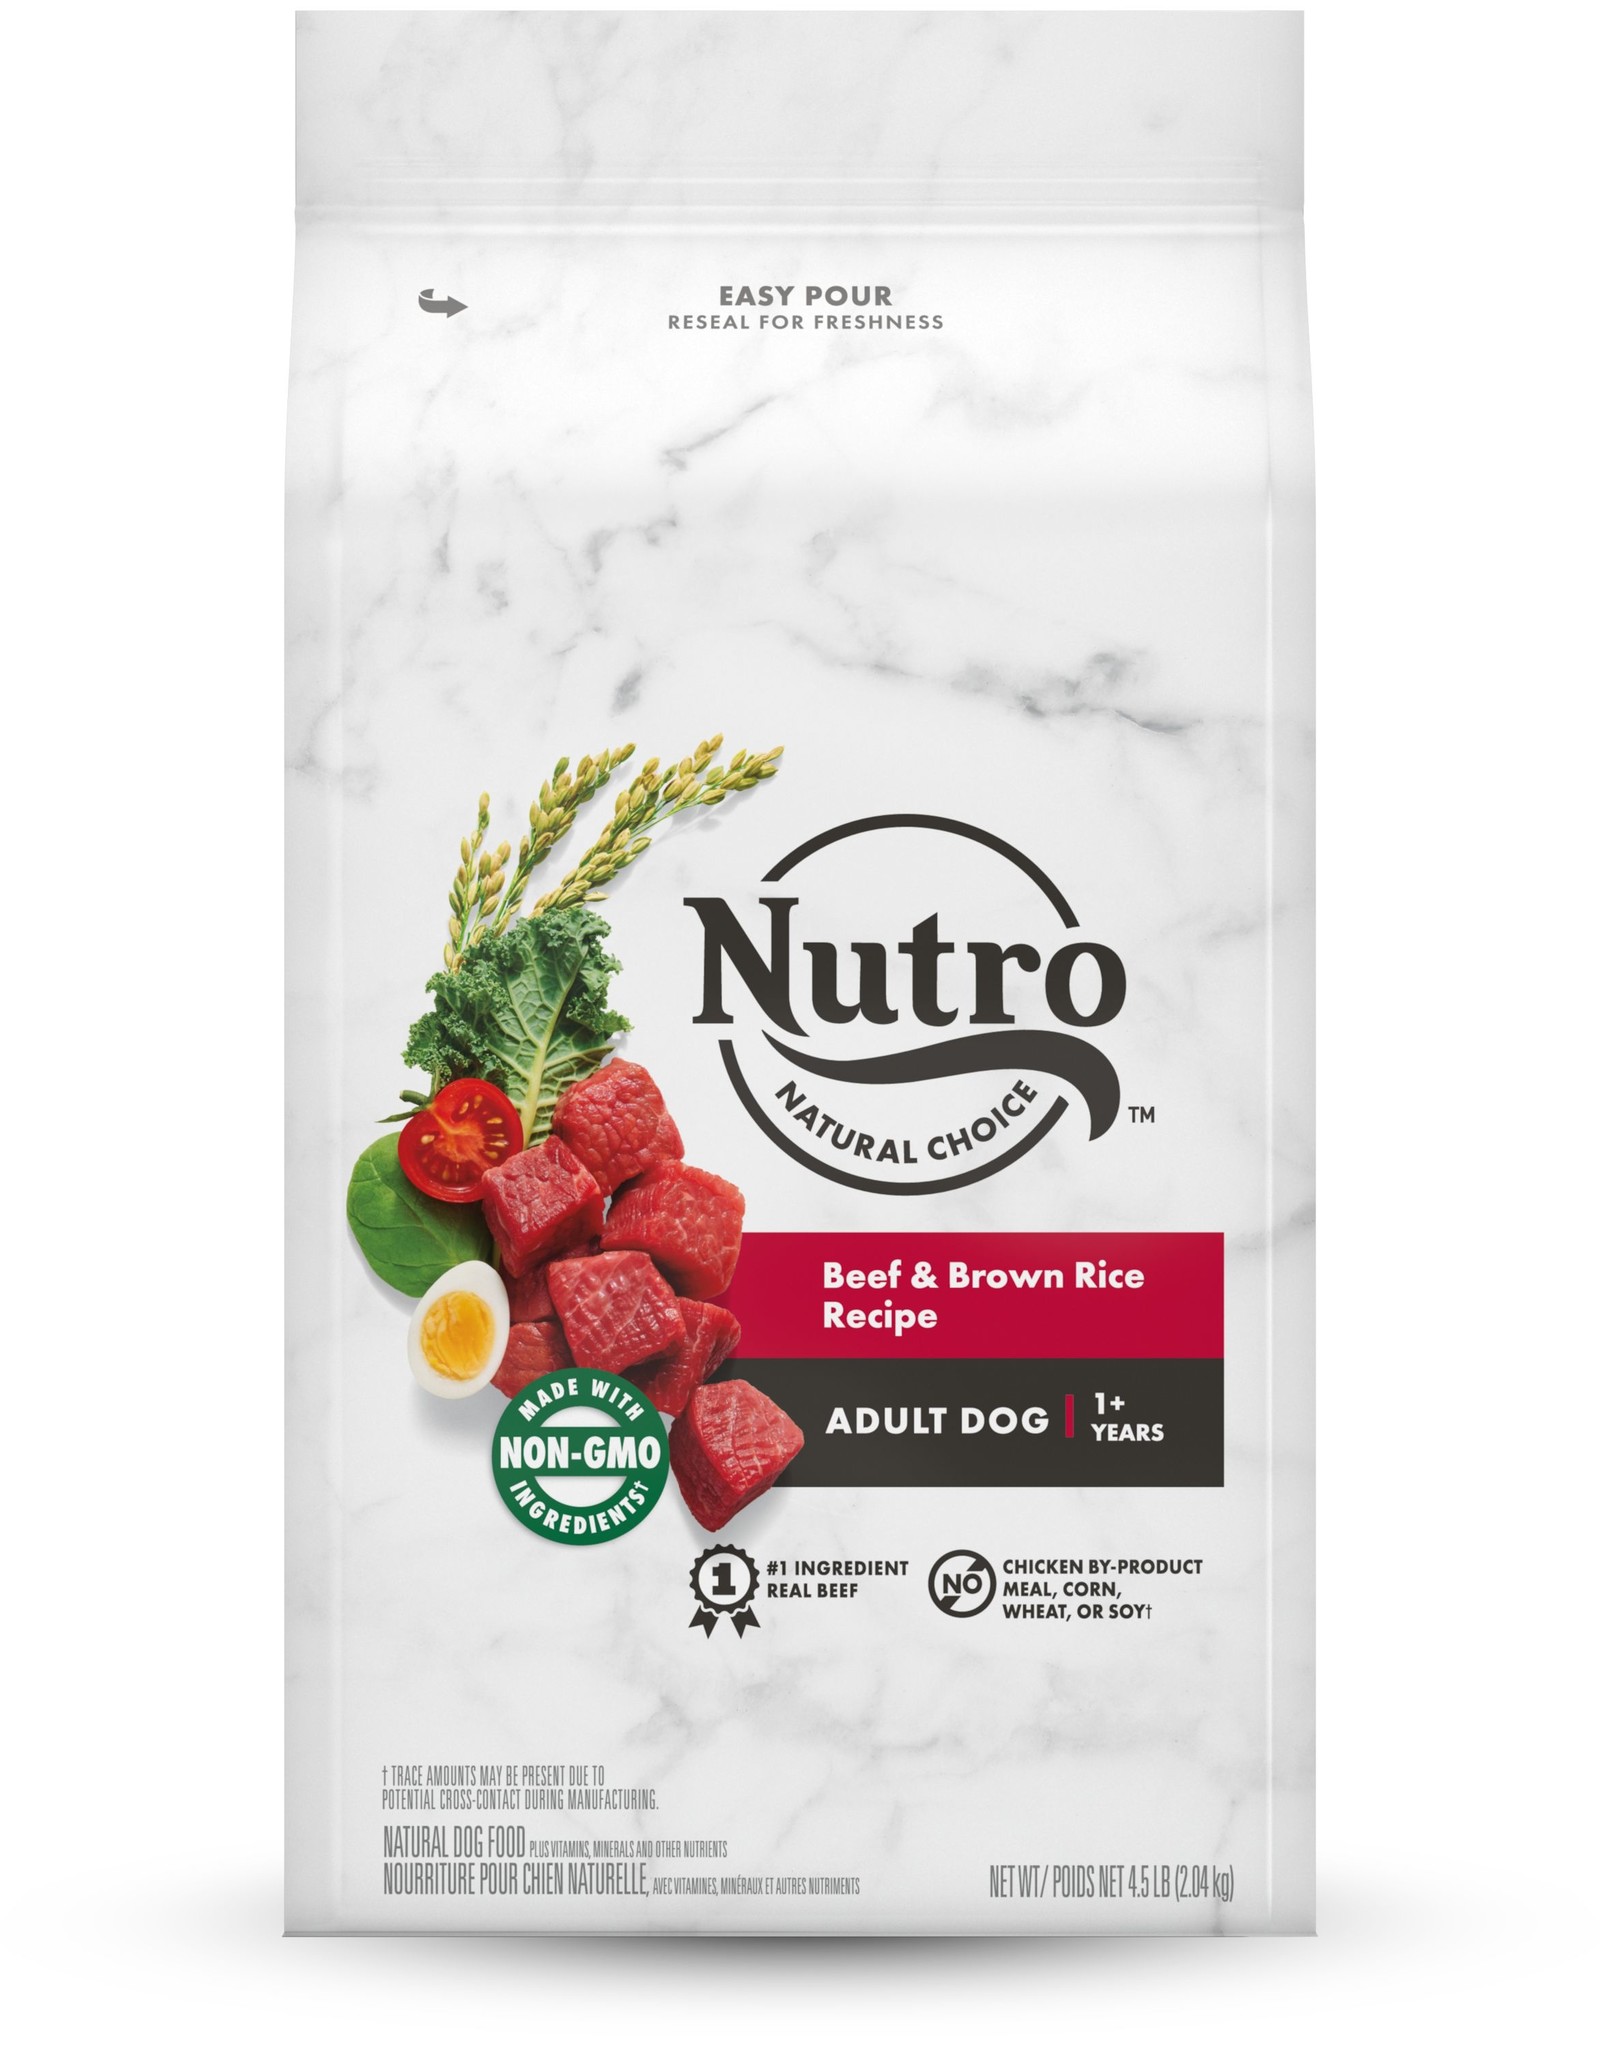 NUTRO PRODUCTS  INC. NUTRO NATURAL CHOICE BEEF & RICE 14LBS